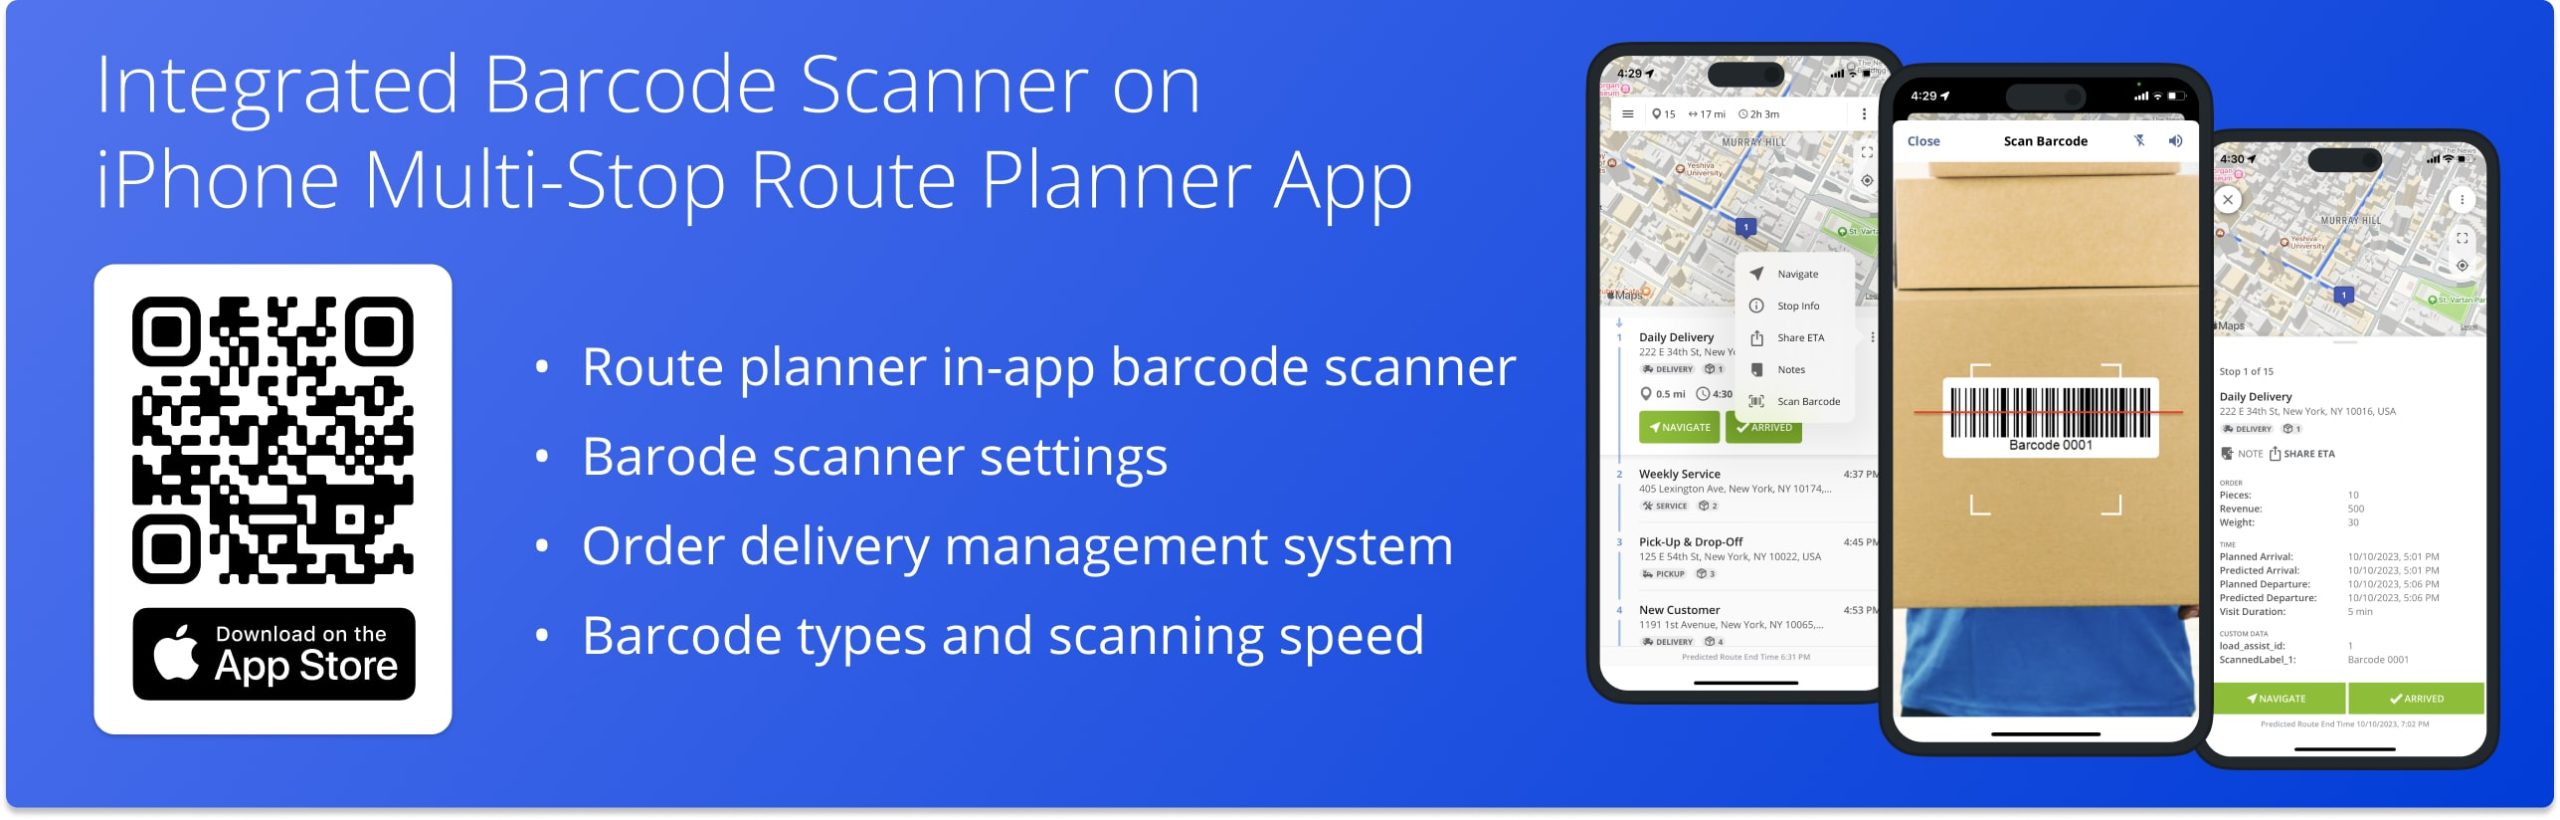 Route4Me's iPhone Multi-Stop Route Planner app with an integrated barcode scanner for delivery drivers and attaching data to route stops.